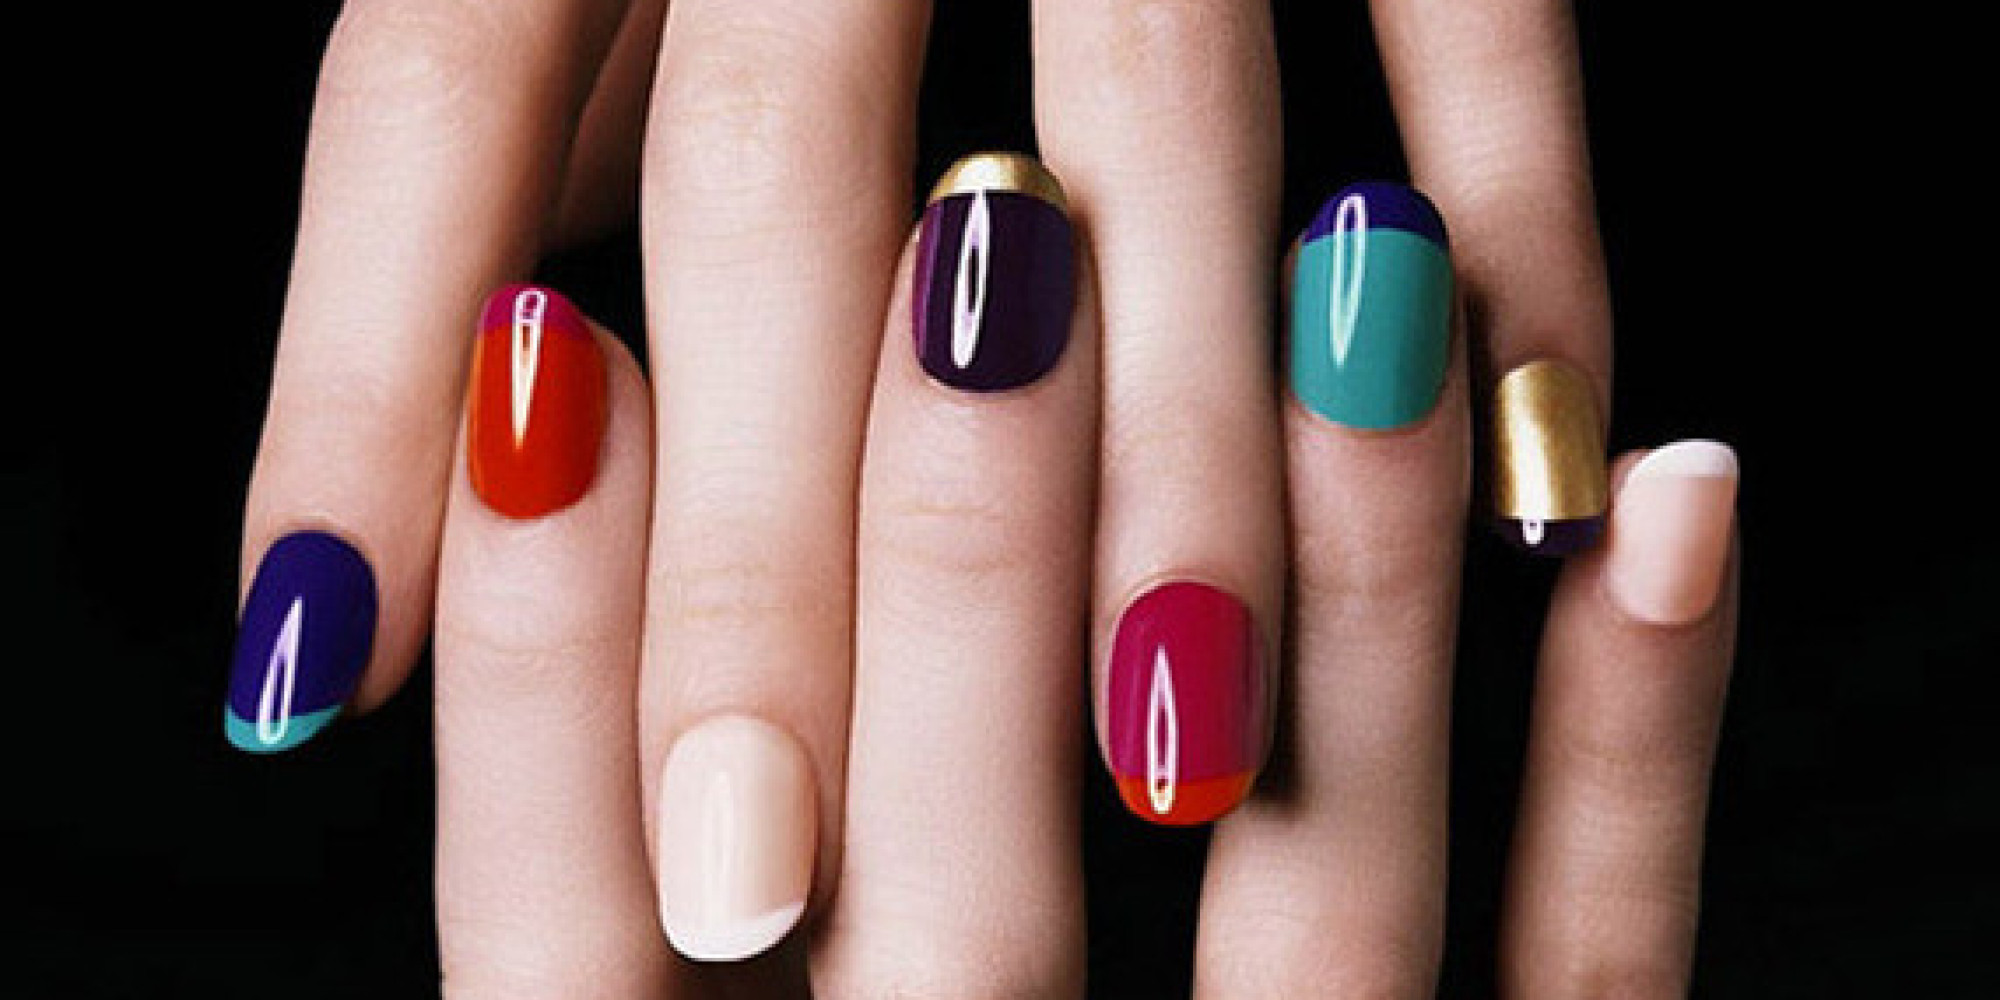 3. How to Achieve a Matte Nail Look with Regular Nail Polish - wide 7